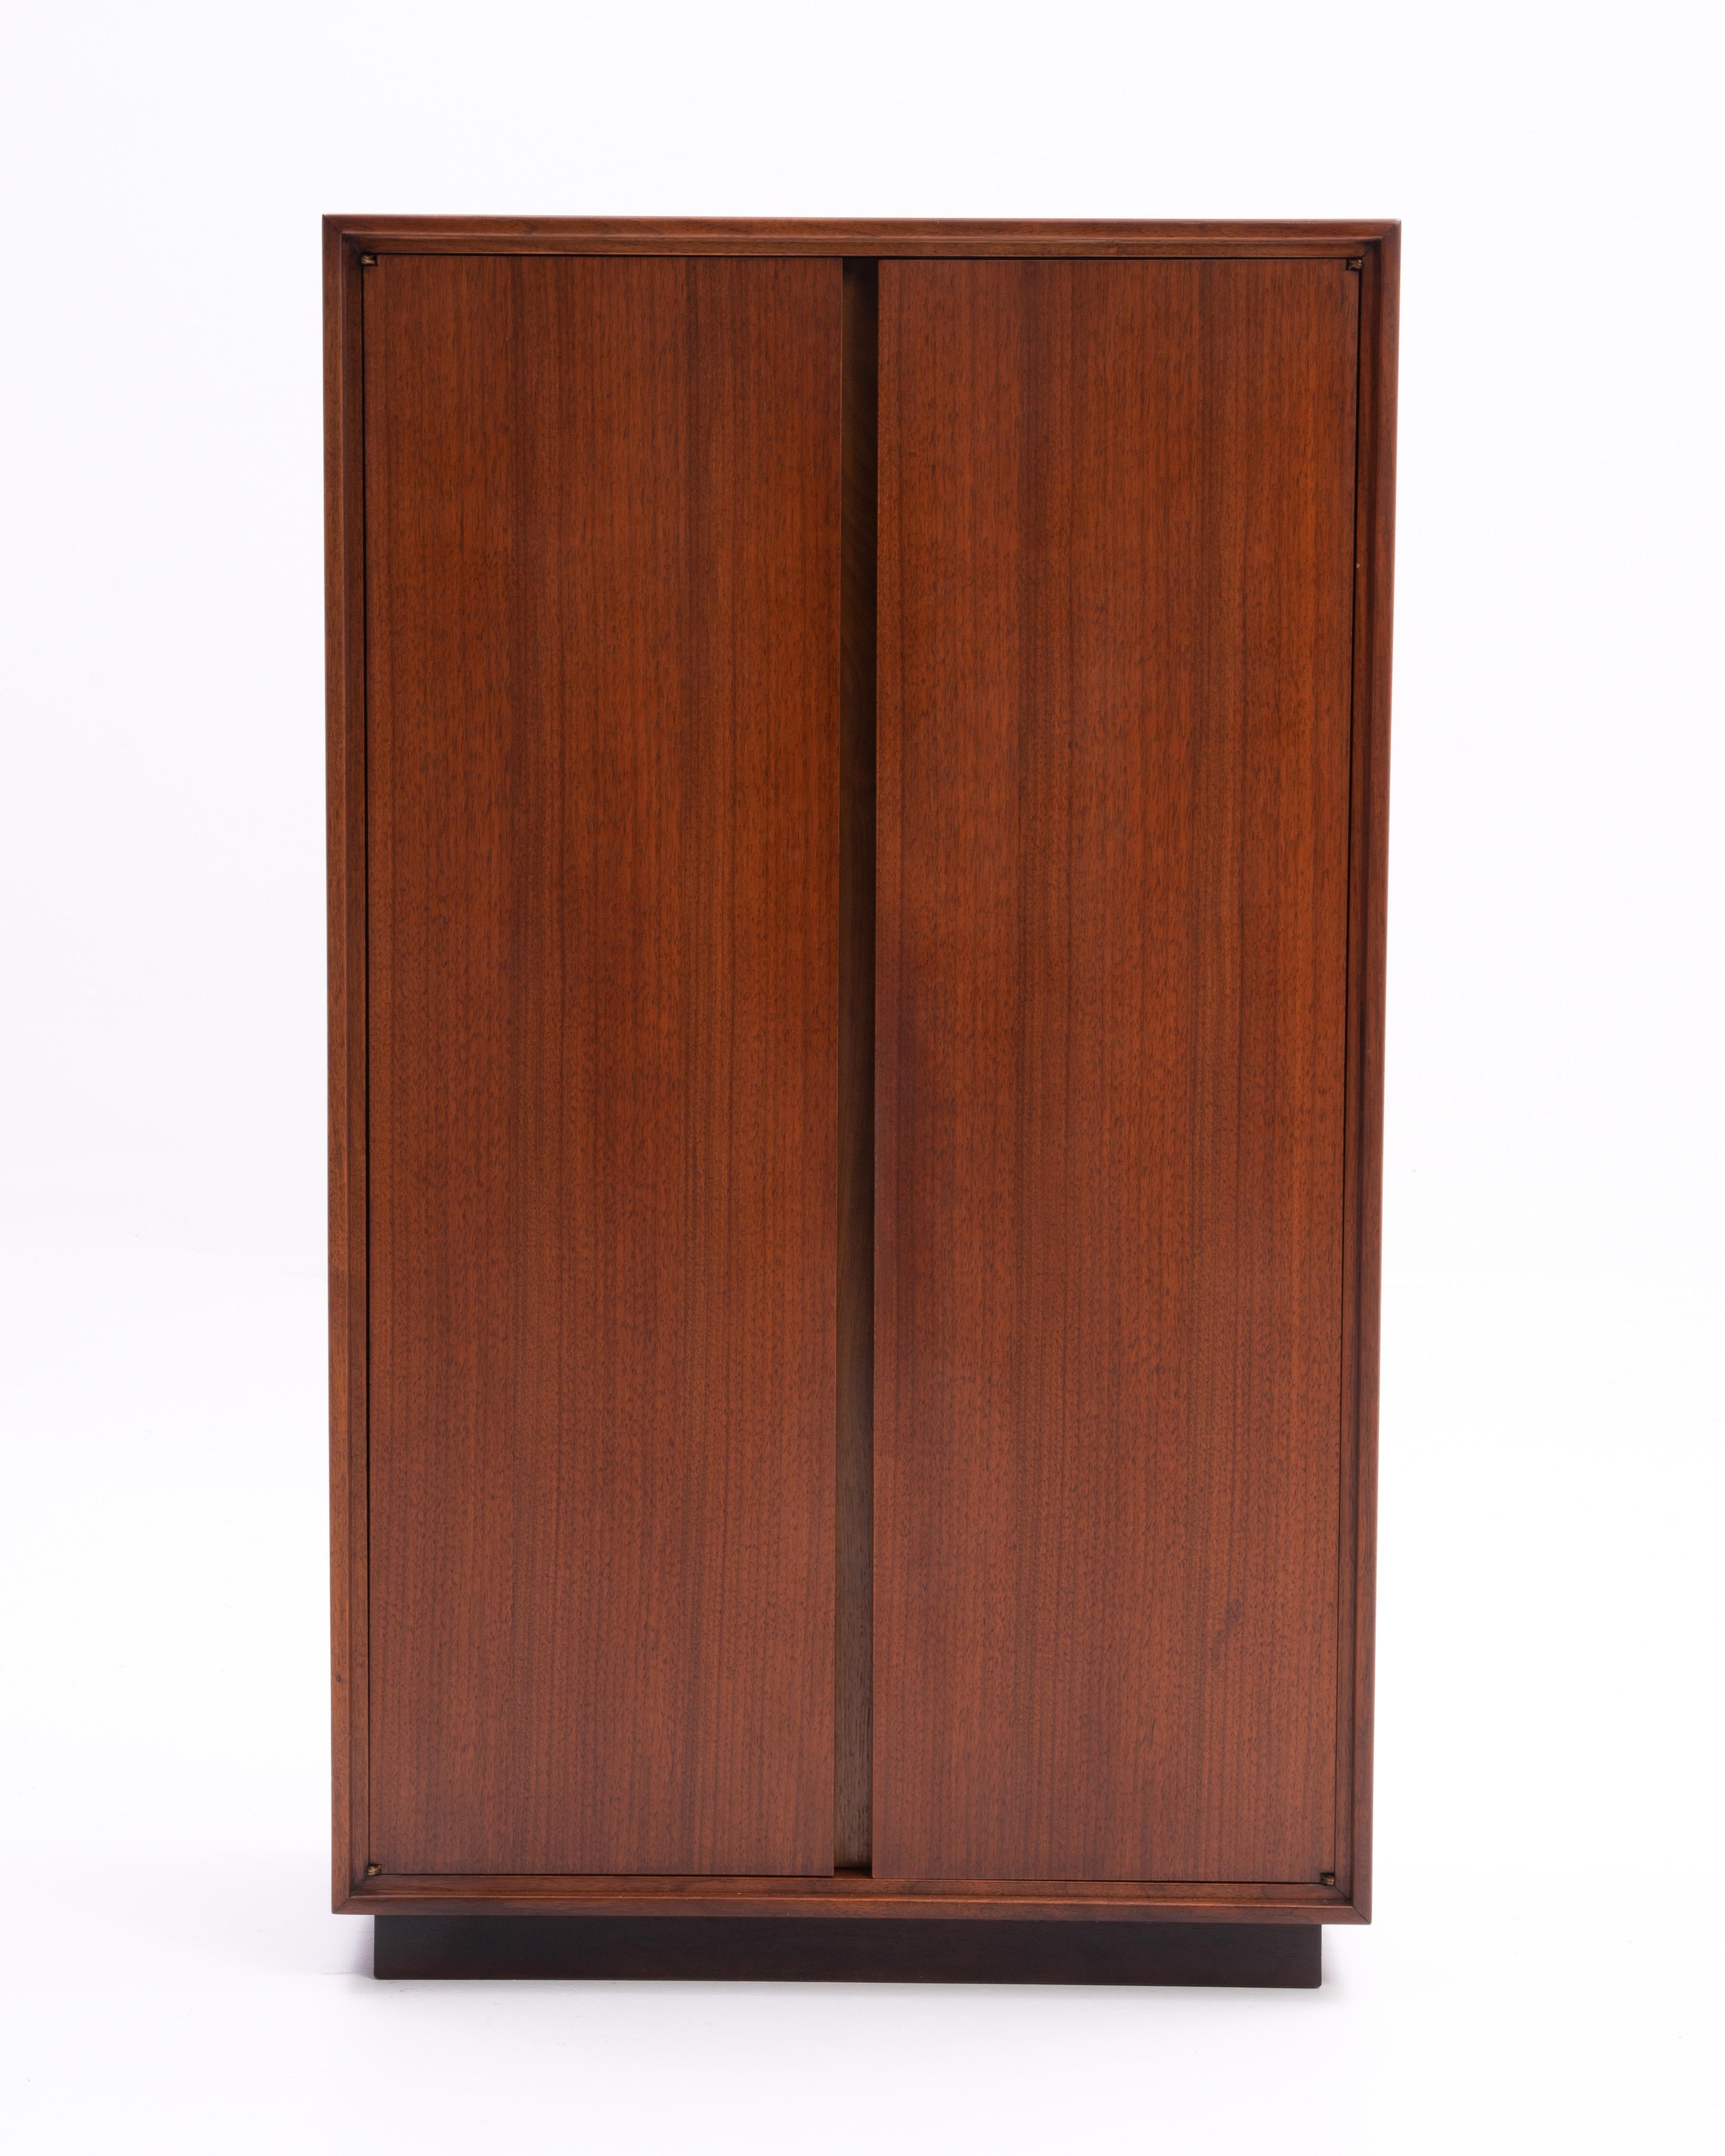 An unmarked walnut cabinet that we are attributing to Jack Cartwright for Founders. The only mark is marked 